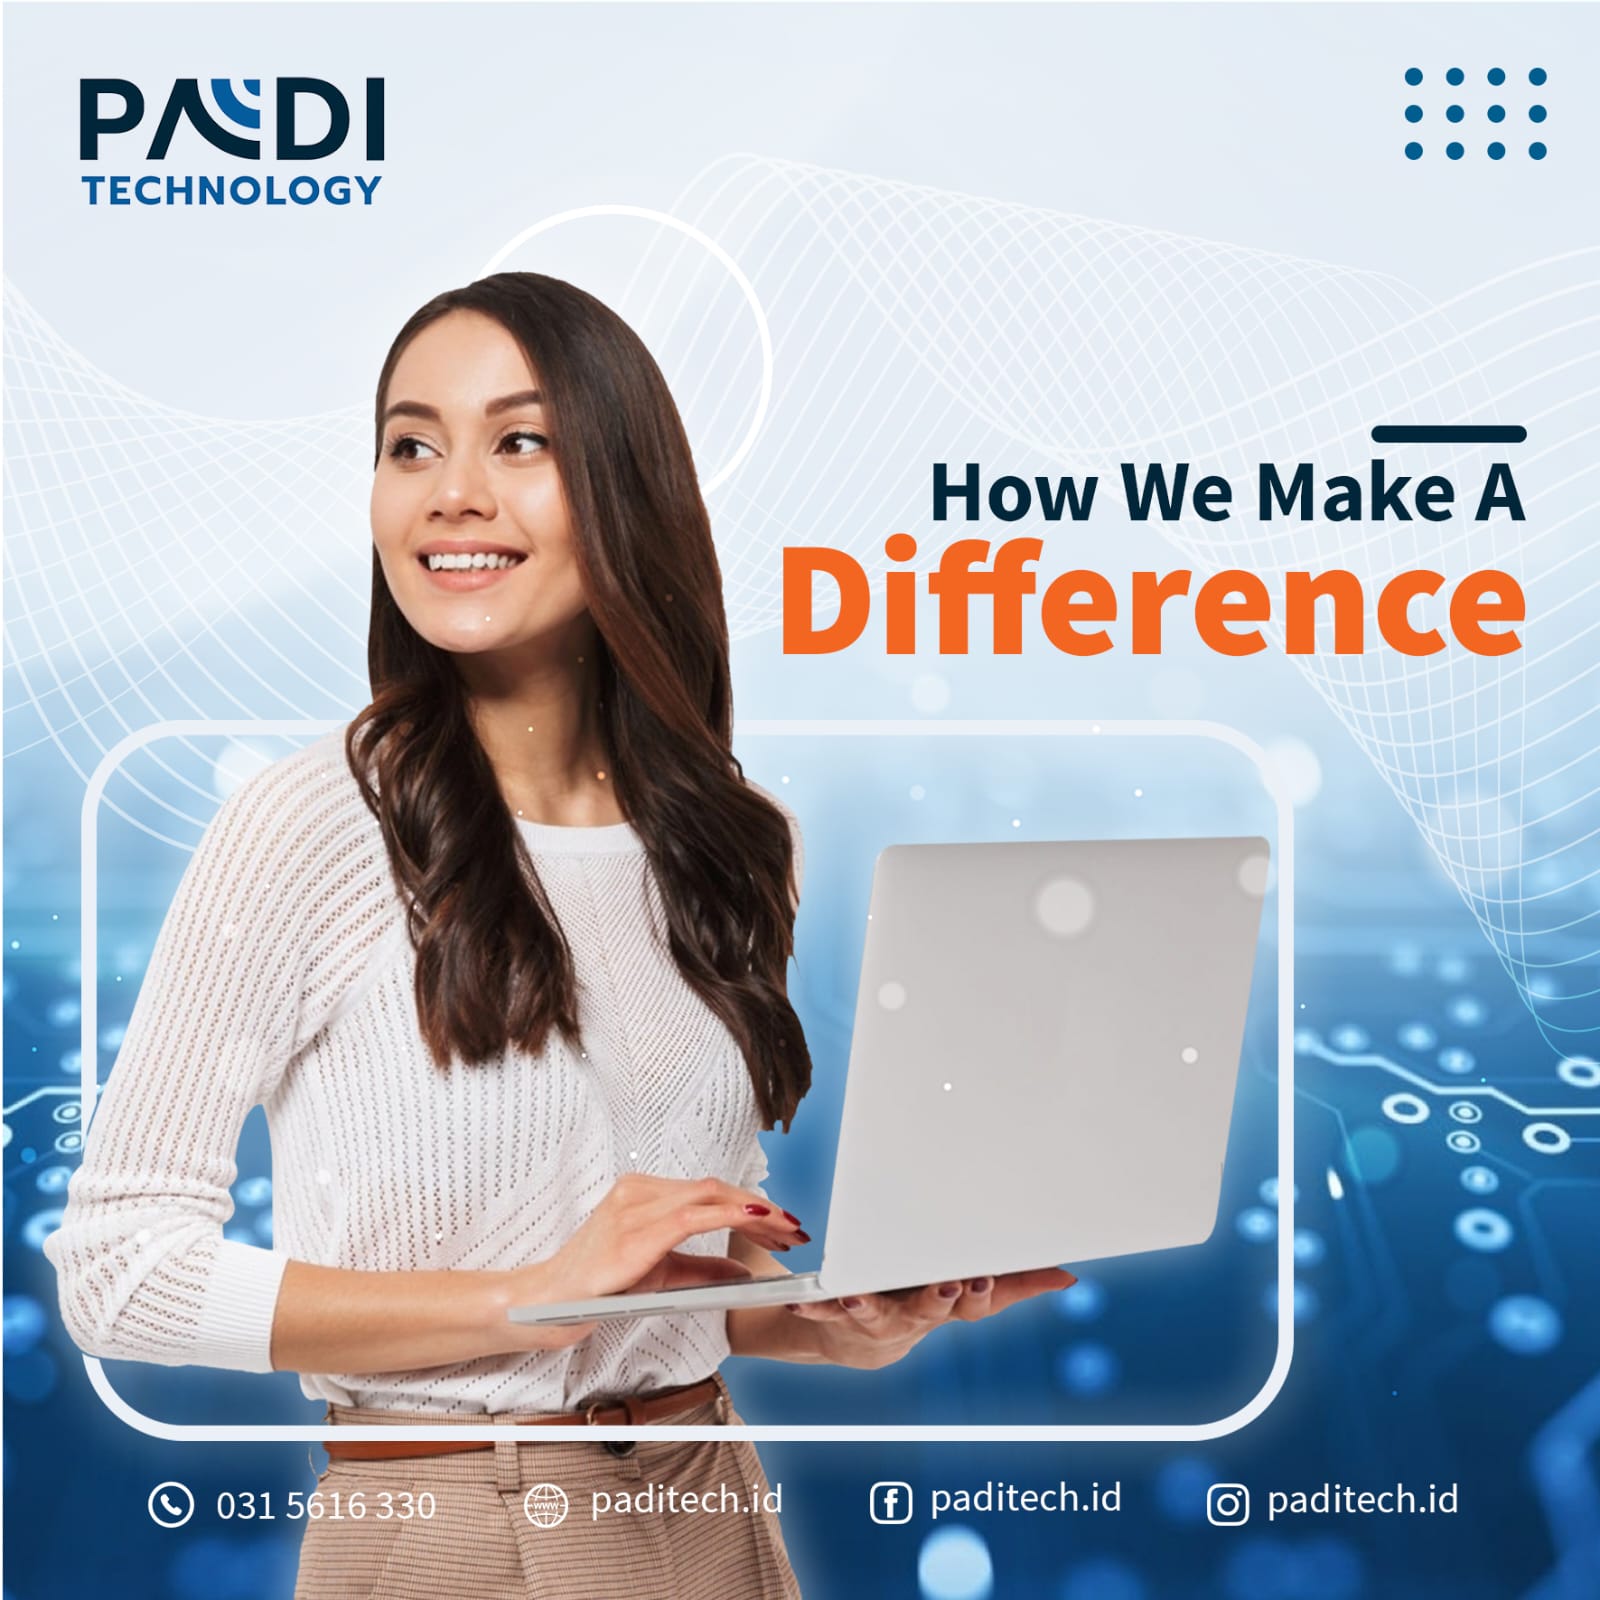 How PadiTech is Transformed, to Make A Difference